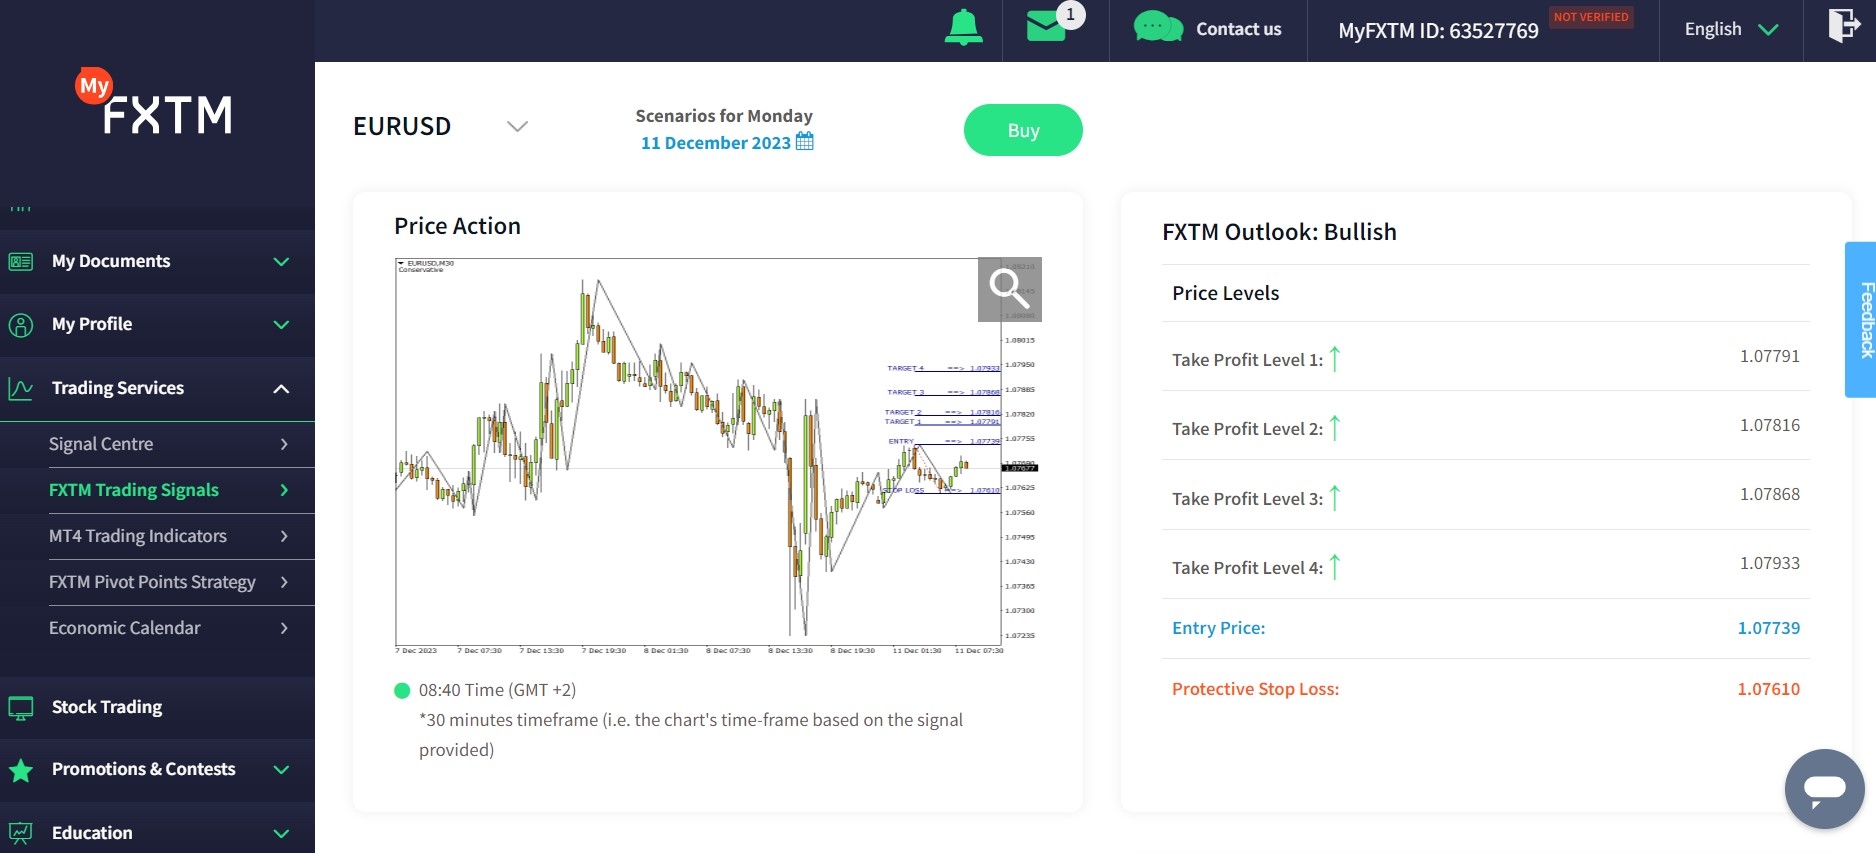 Trading signals on FXTM